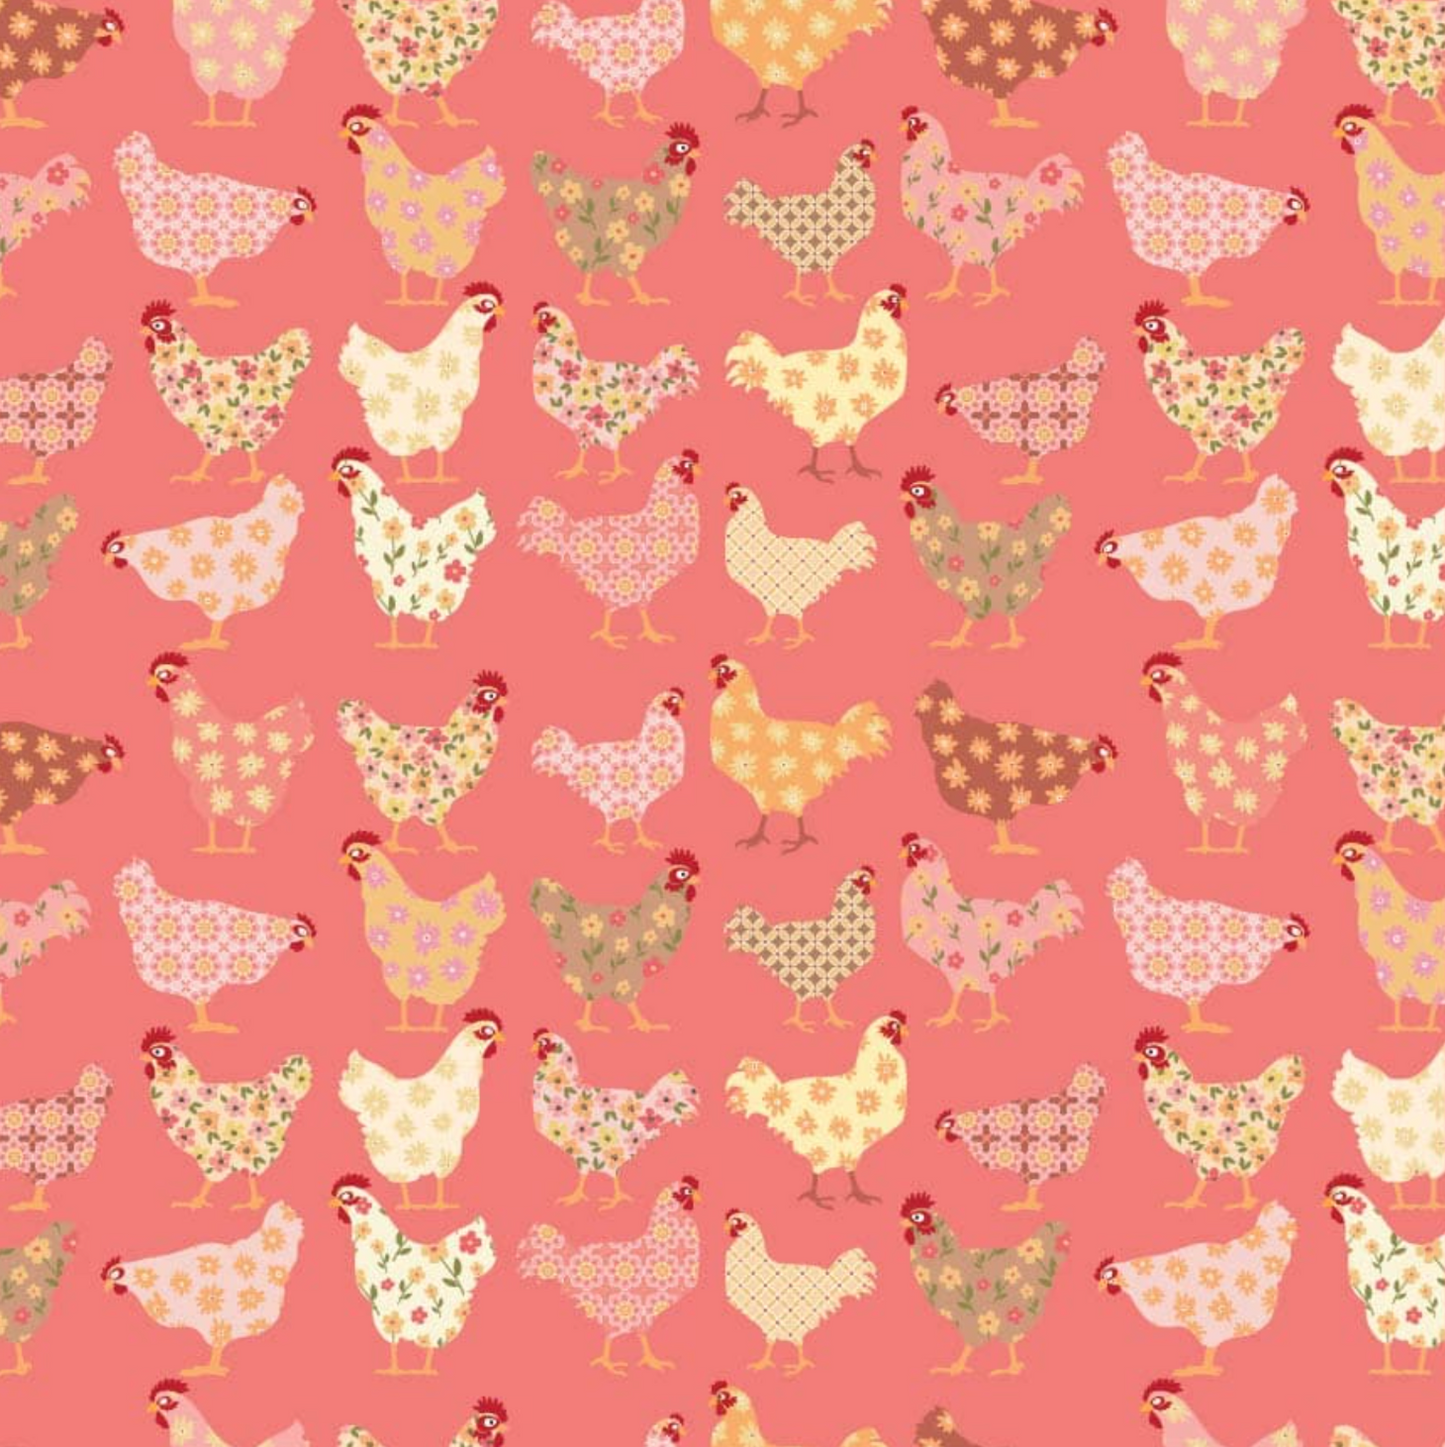 Prairie Sisters Cheeky Chickens Pink PH23401, sold by the 1/2 yard